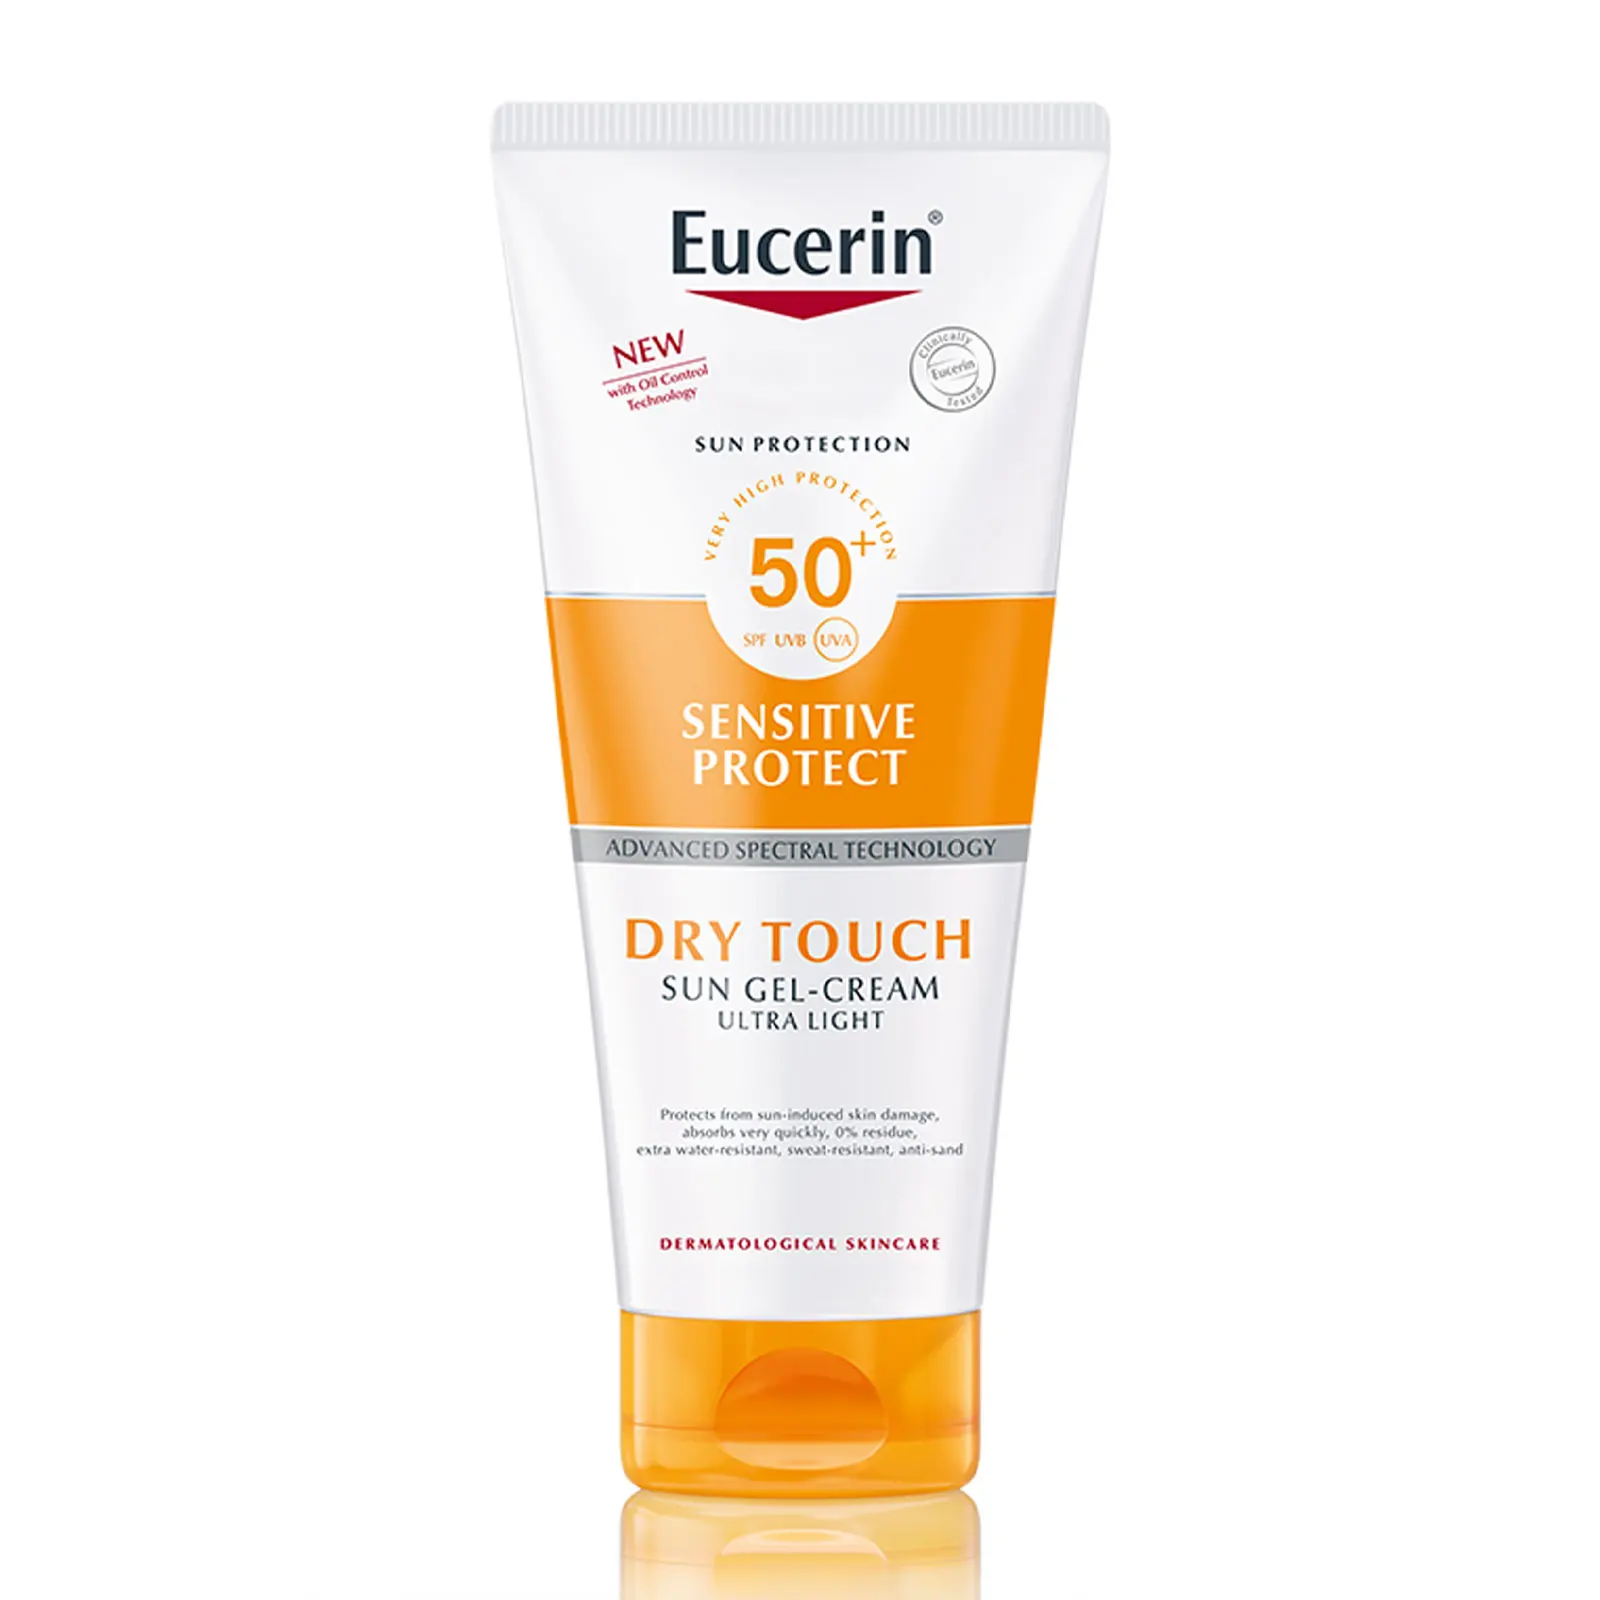 Eucerin Sun Gel-Cream Dry Touch Sensitive Protect SPF 50+ Discounts and Cashback